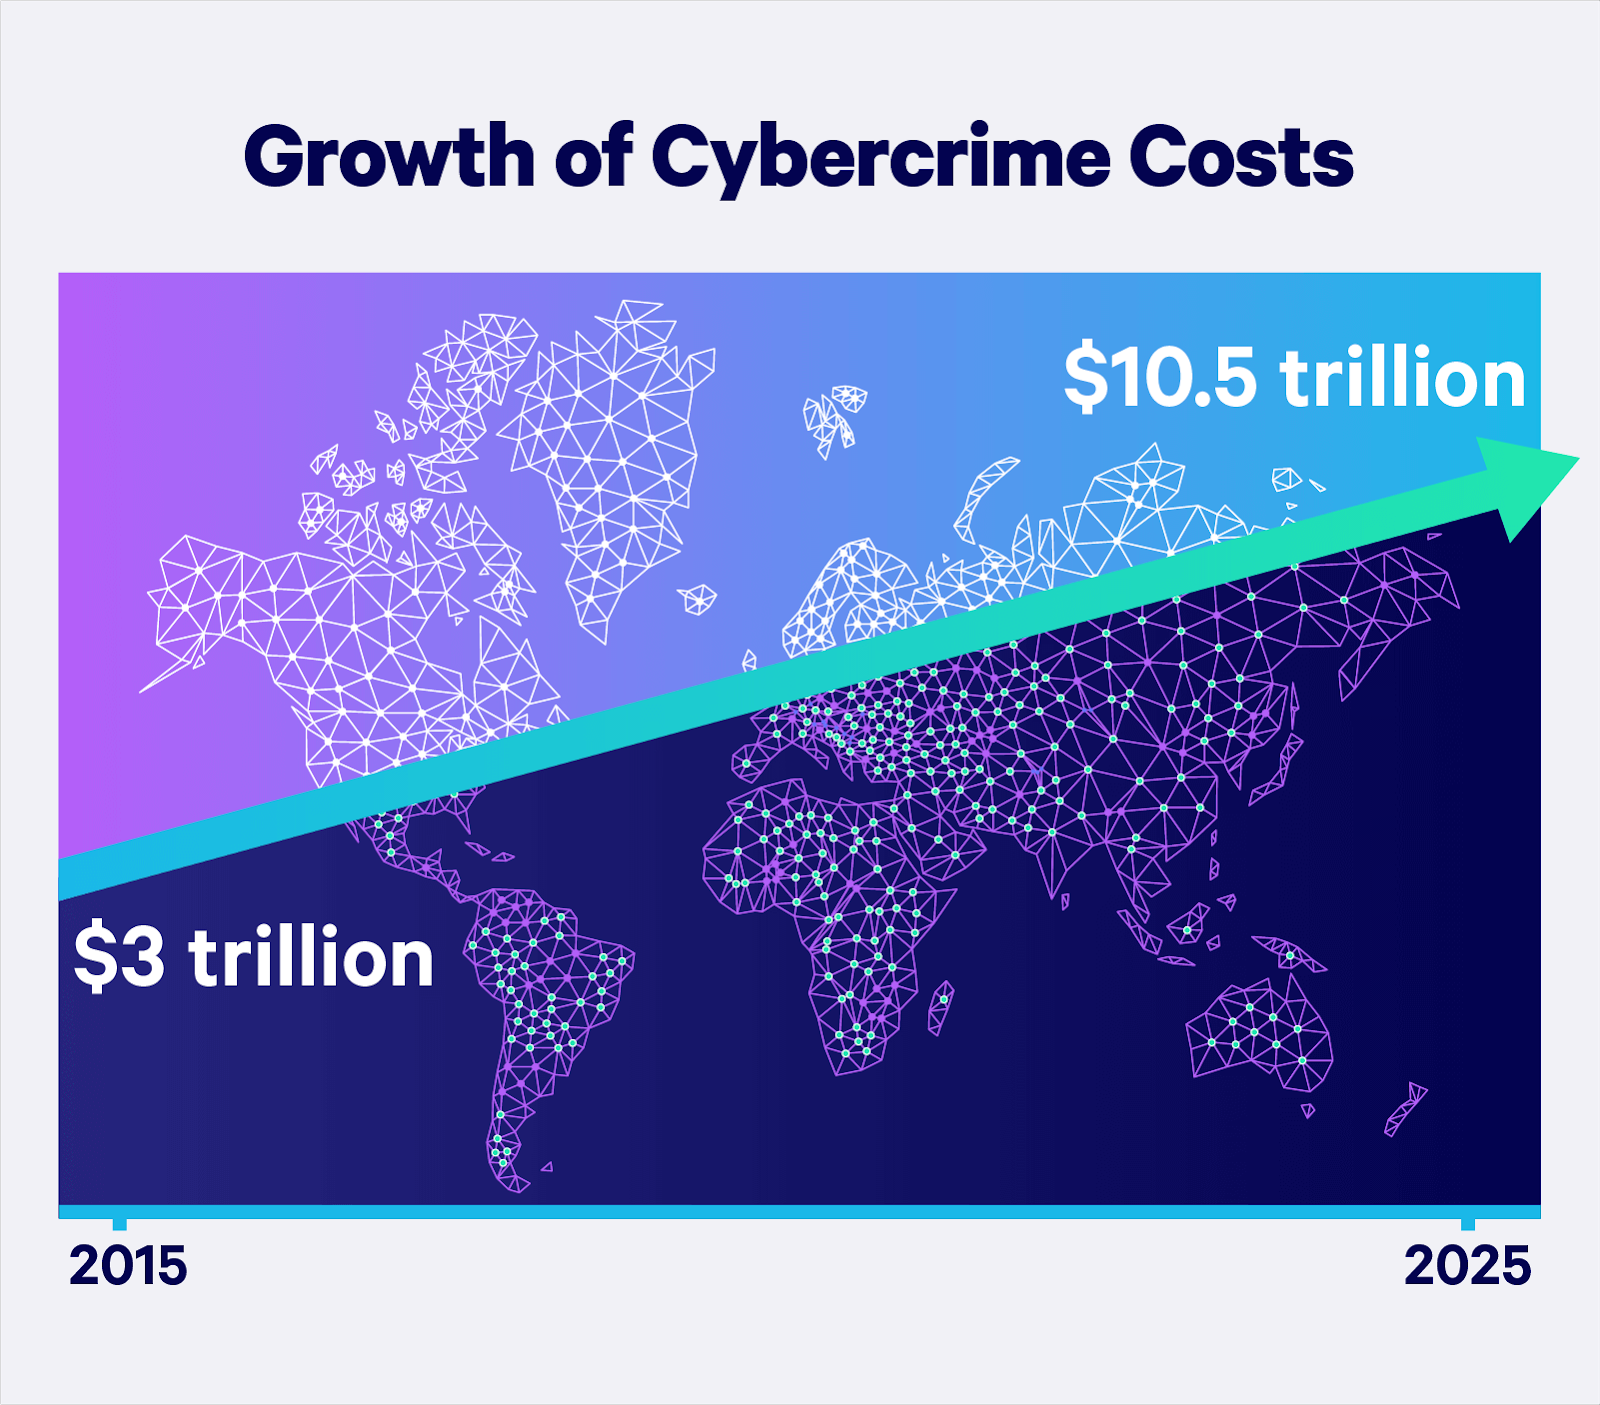 Growth of Cybercrime Costs